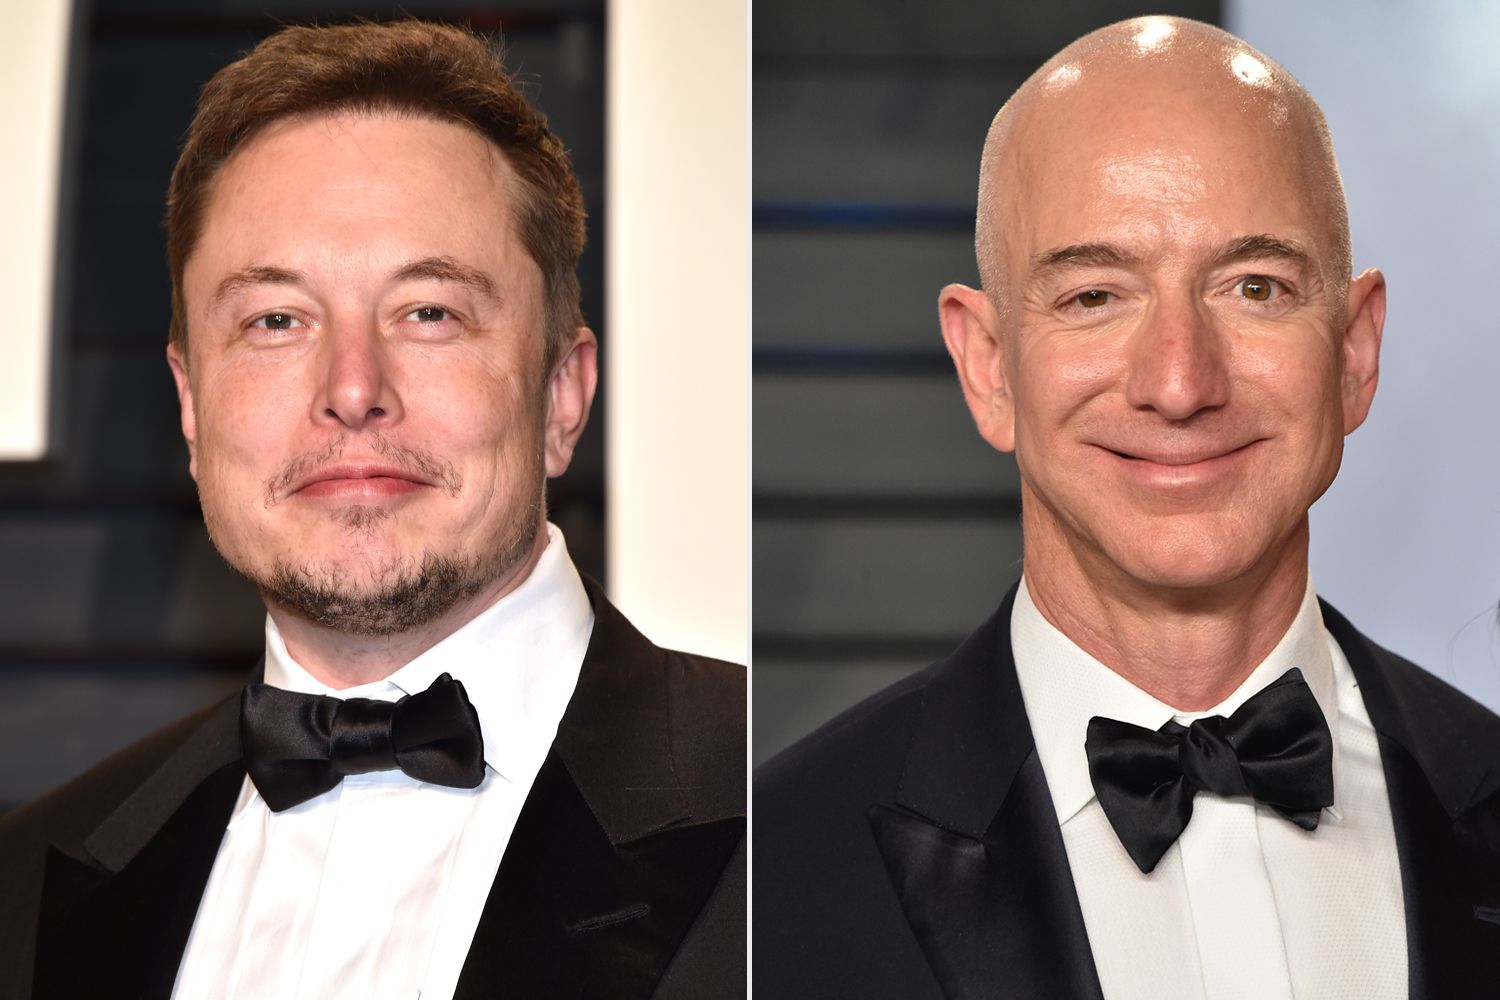 Jeff Bezos dethrones Elon Musk to become the richest person on Earth again